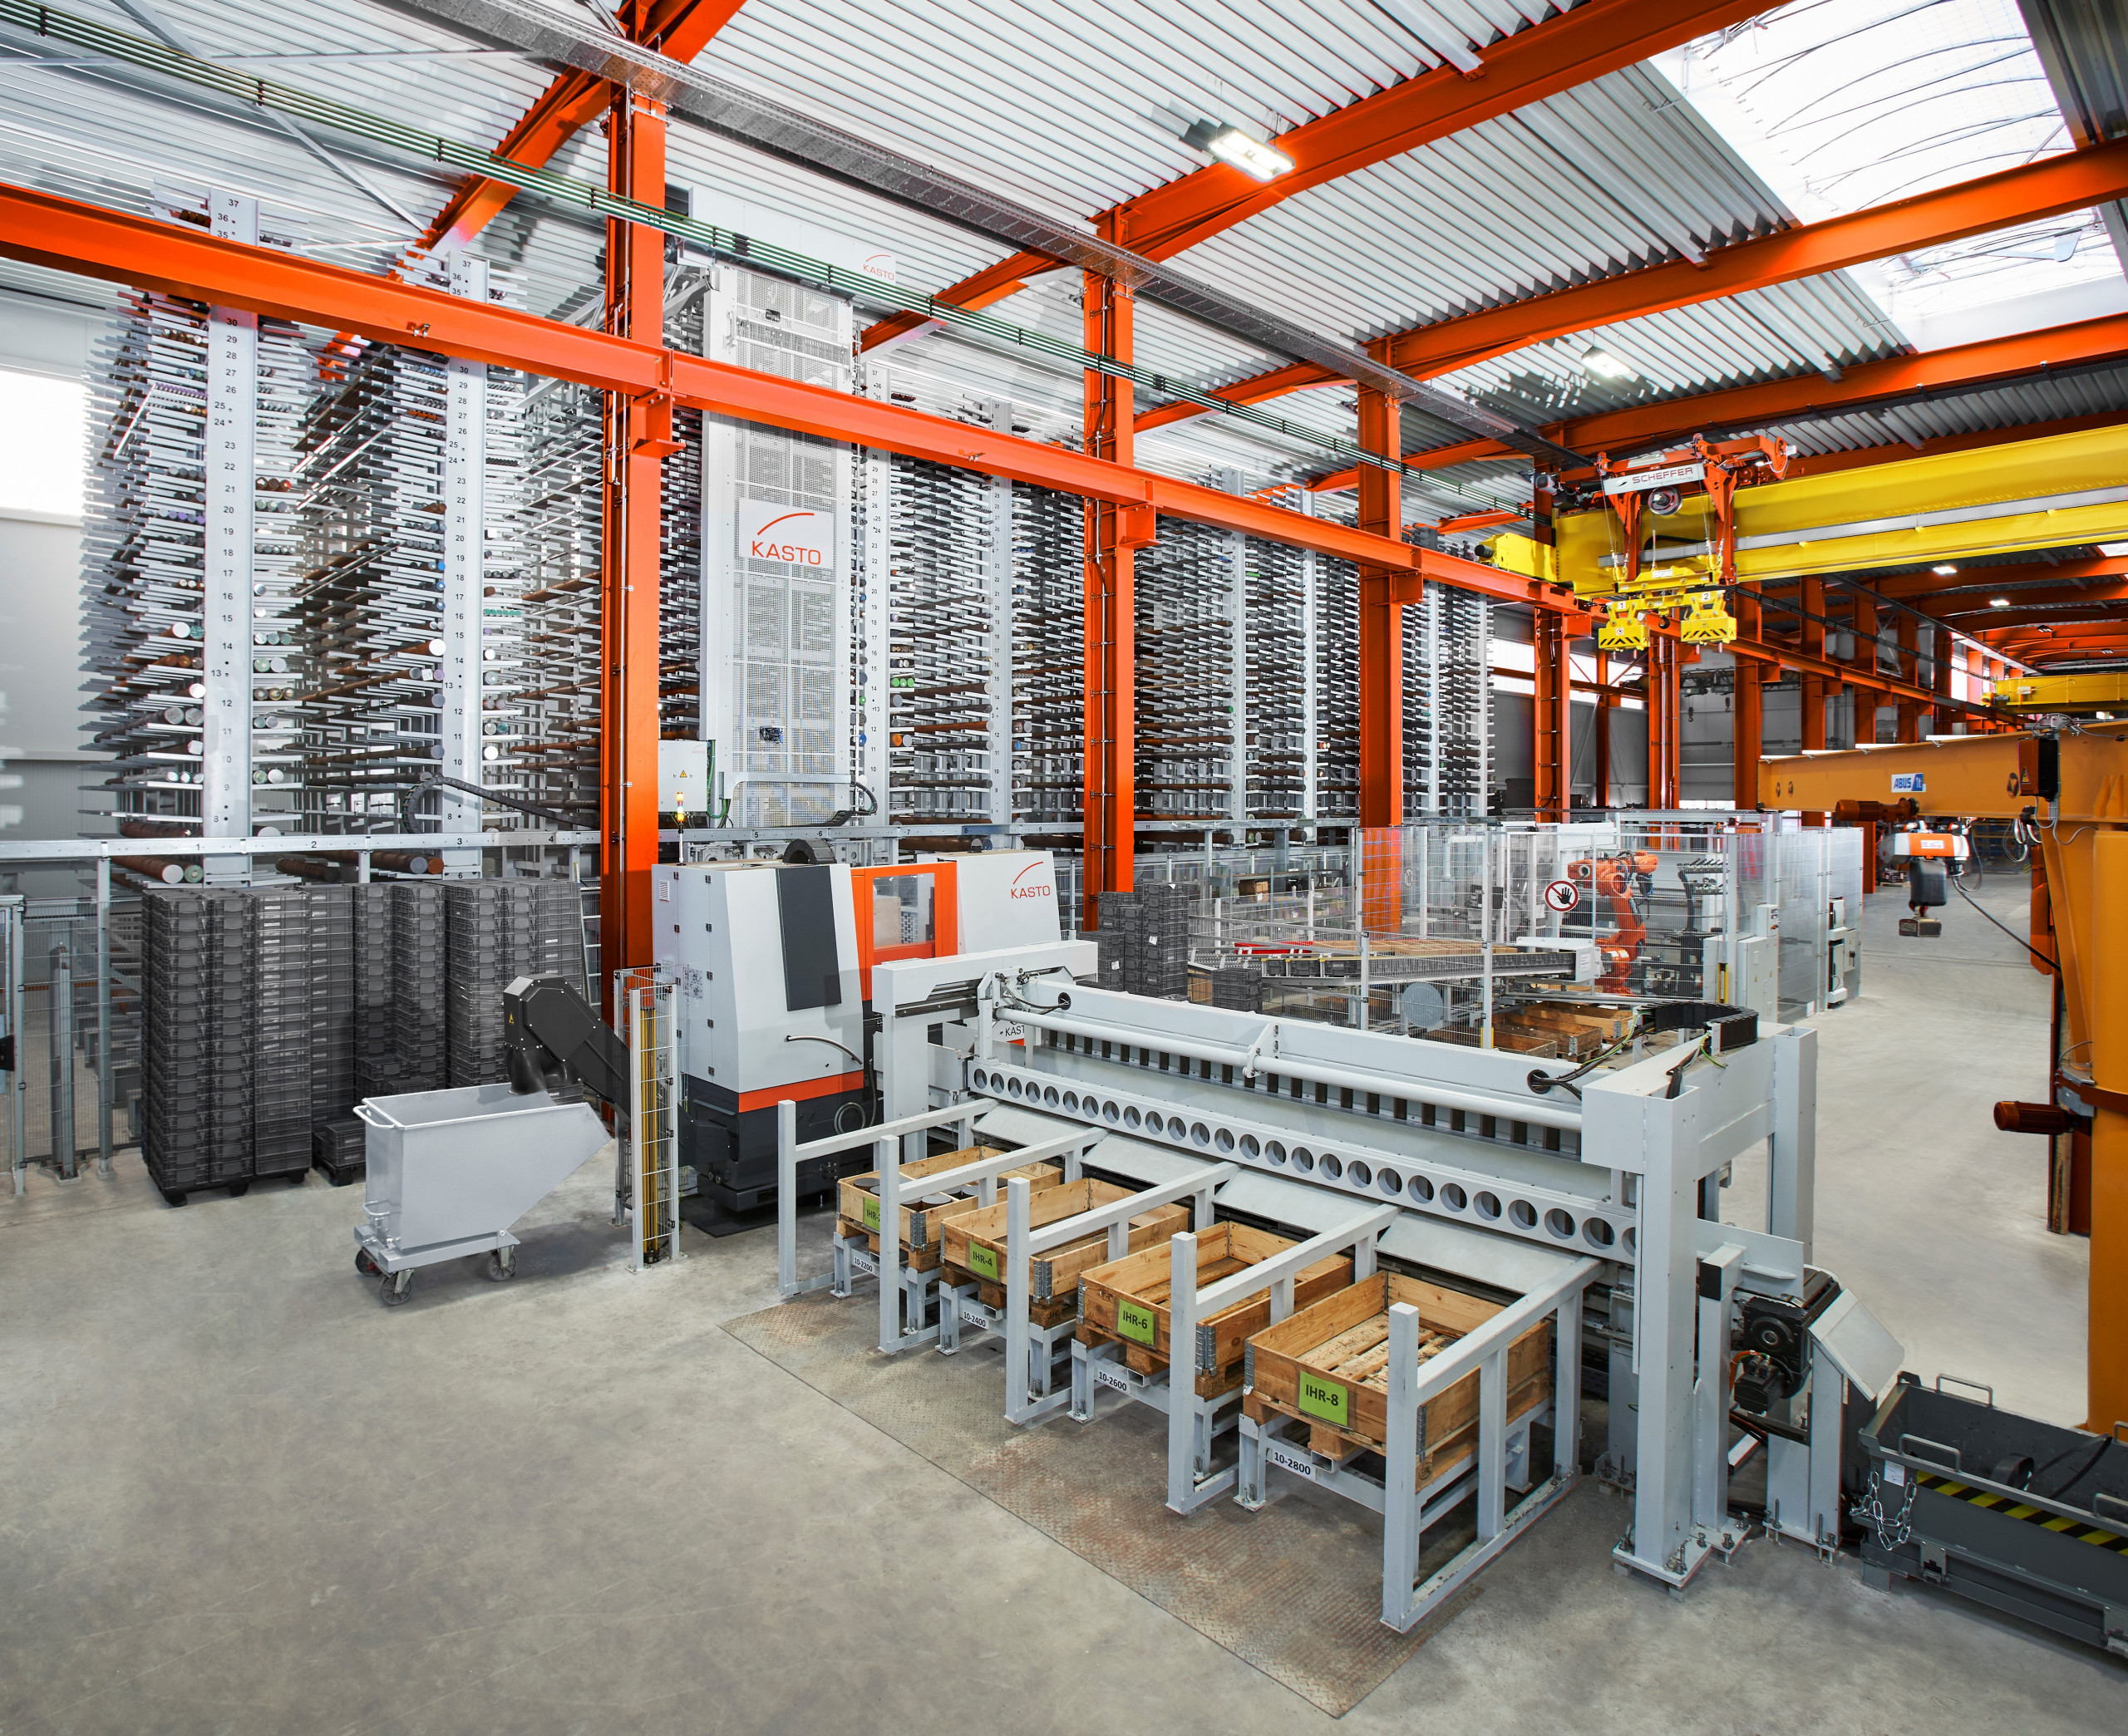 Everything runs automatically in Kasto sawing centers: storage and retrieval machines bring long goods to an integrated CNC sawing machine and automatically store the remaining pieces. Kasto Maschinenbau GmbH & Co. KG